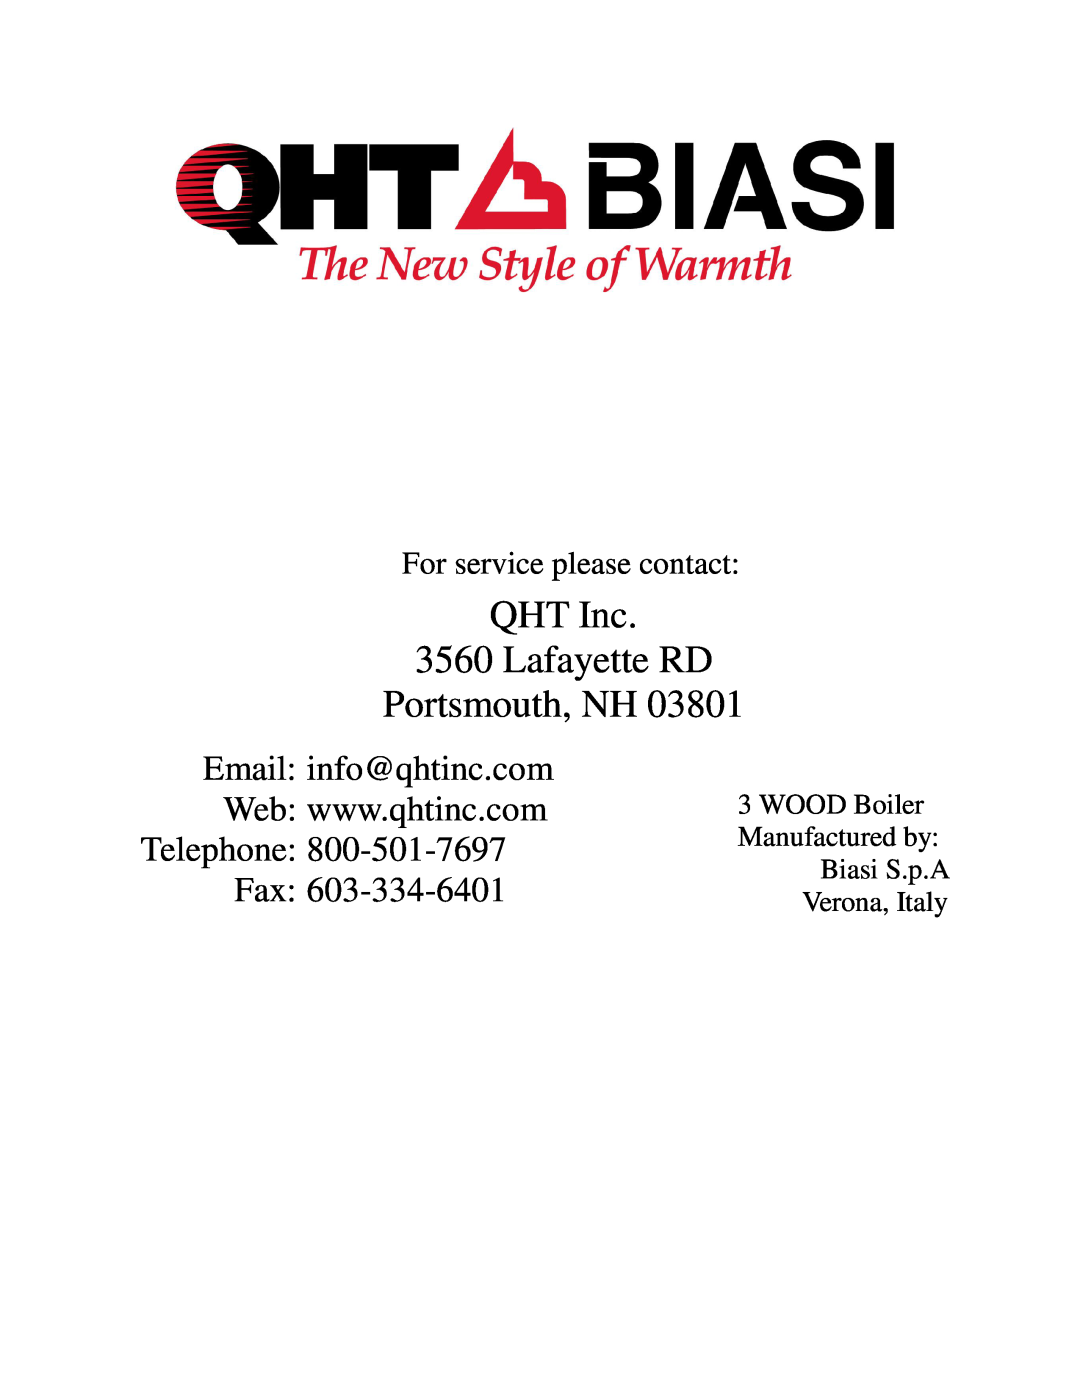 QHT Boiler manual For service please contact, QHT Inc 3560 Lafayette RD Portsmouth, NH, Telephone 800-501-7697Fax 